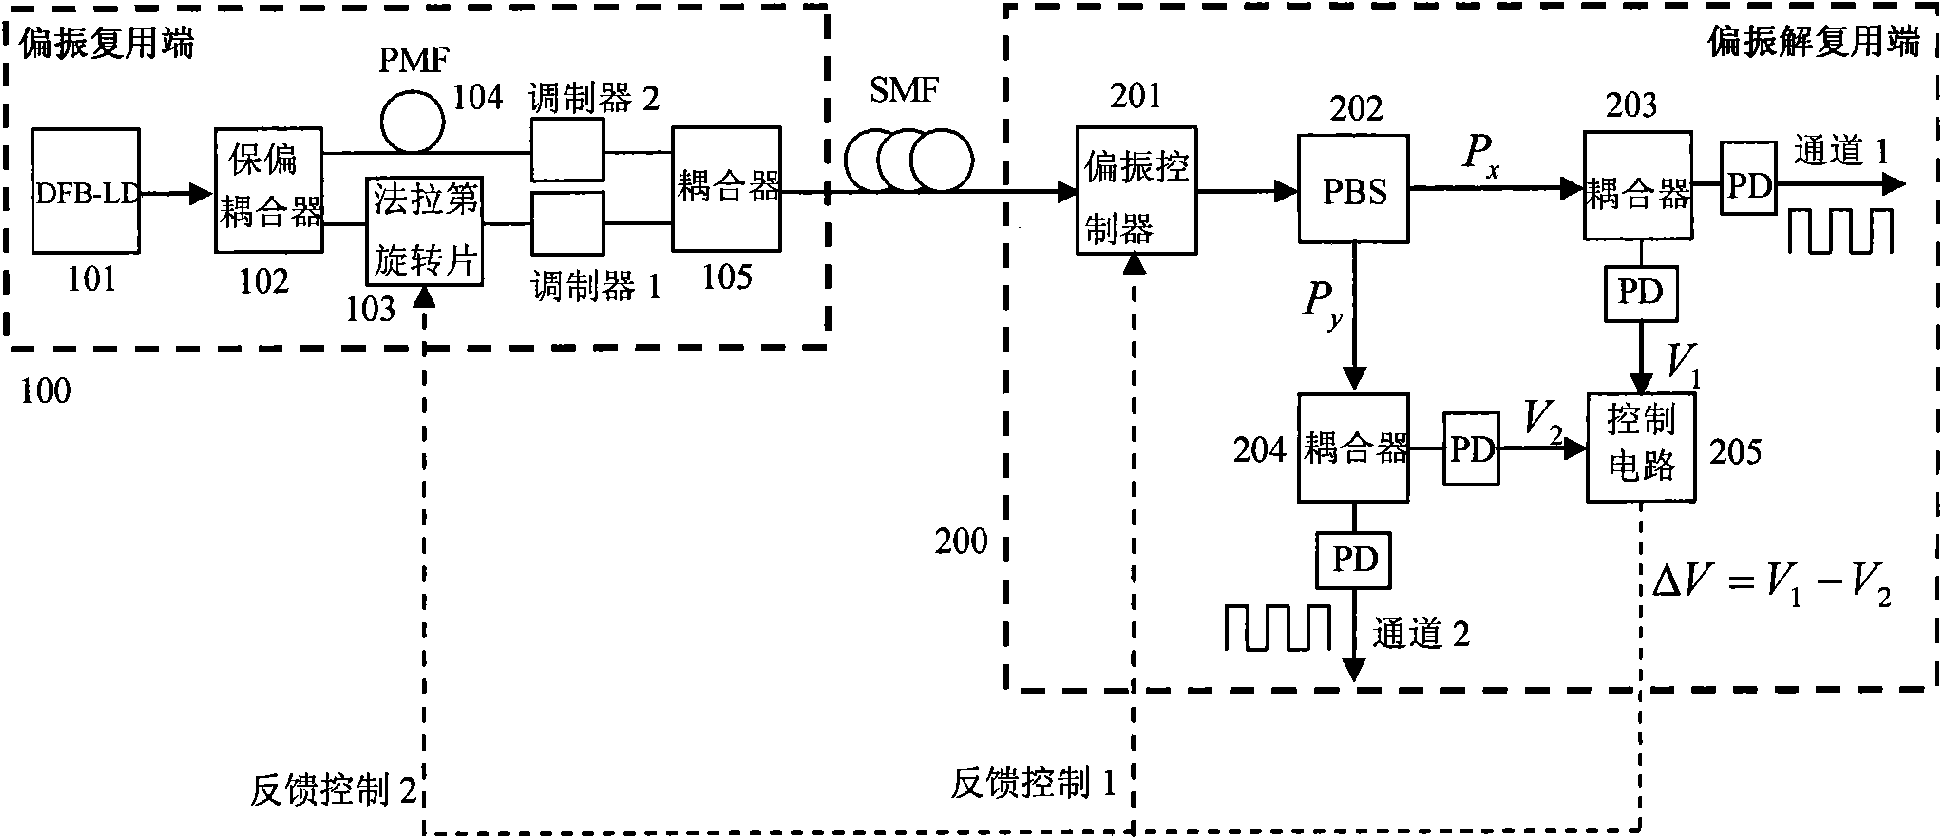 Polarization multiplexing system for overcoming crosstalk between two polarization channels caused by optical fiber PDL